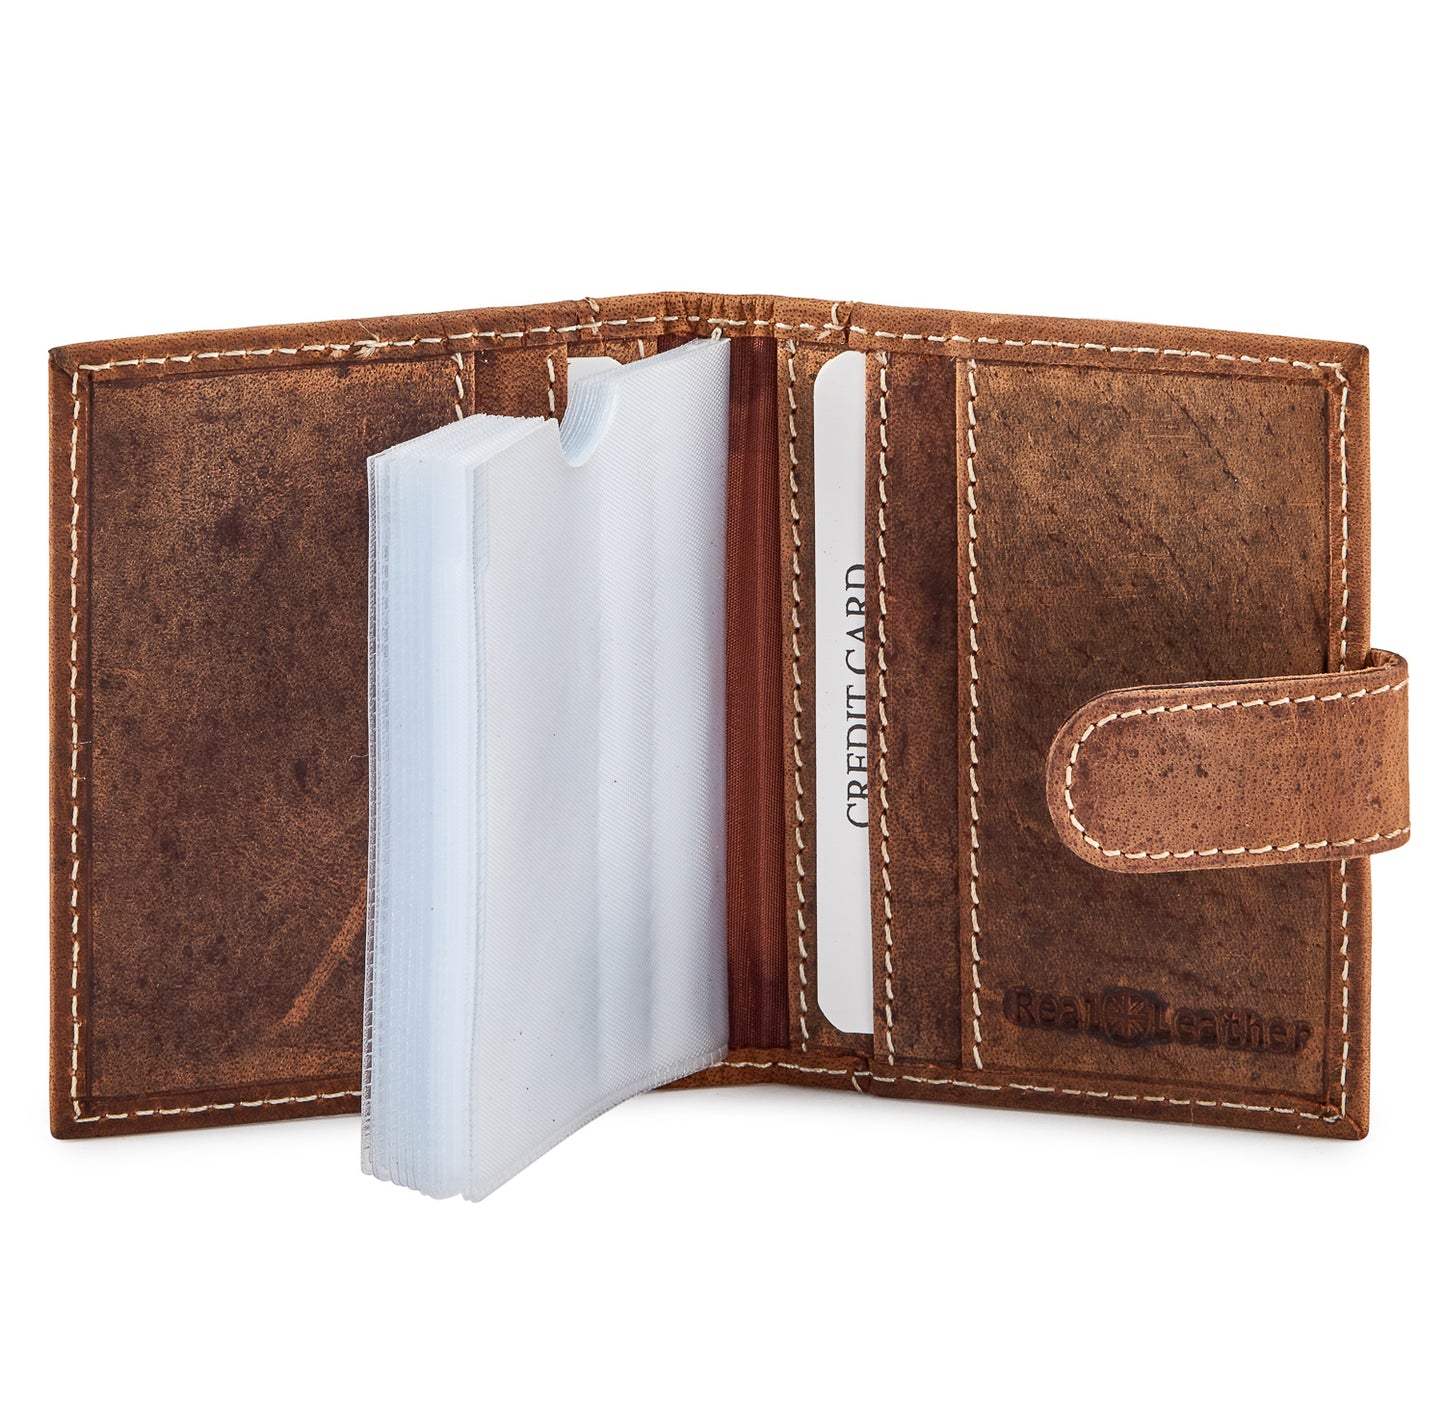 HYDESTYLE Genuine Leather Credit Card Holder Wallet For 34 cards with Plastic Sleeves #GW701